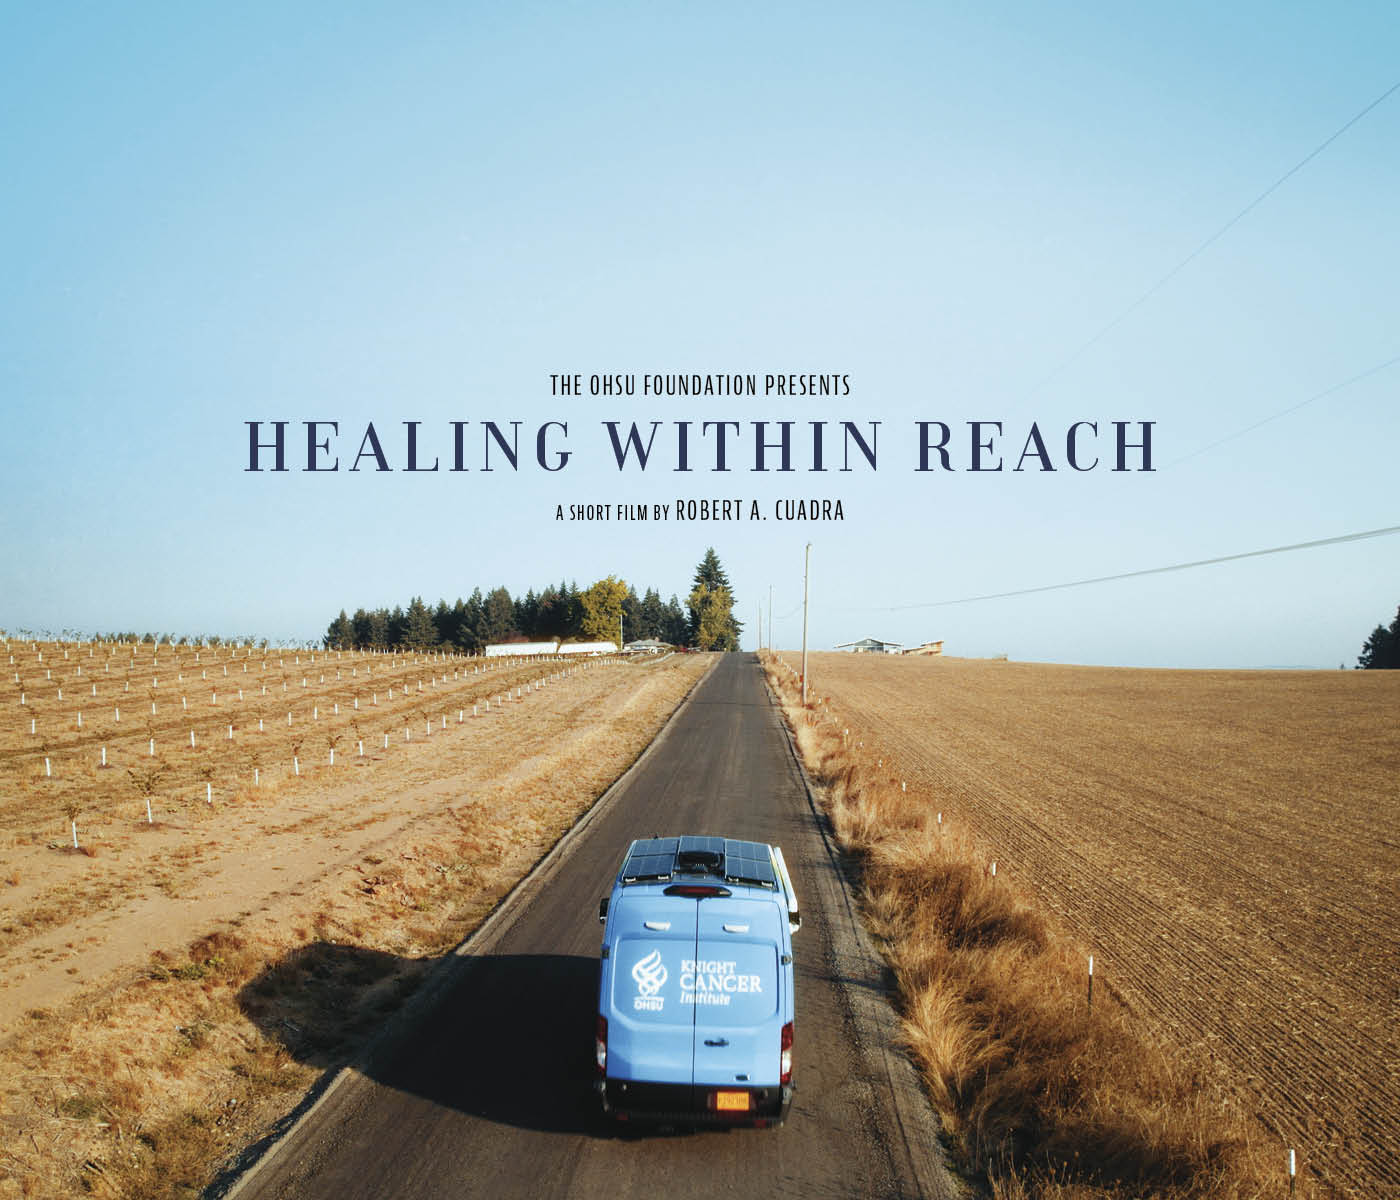 Healing Within Reach documentary film - Knight Cancer Institute